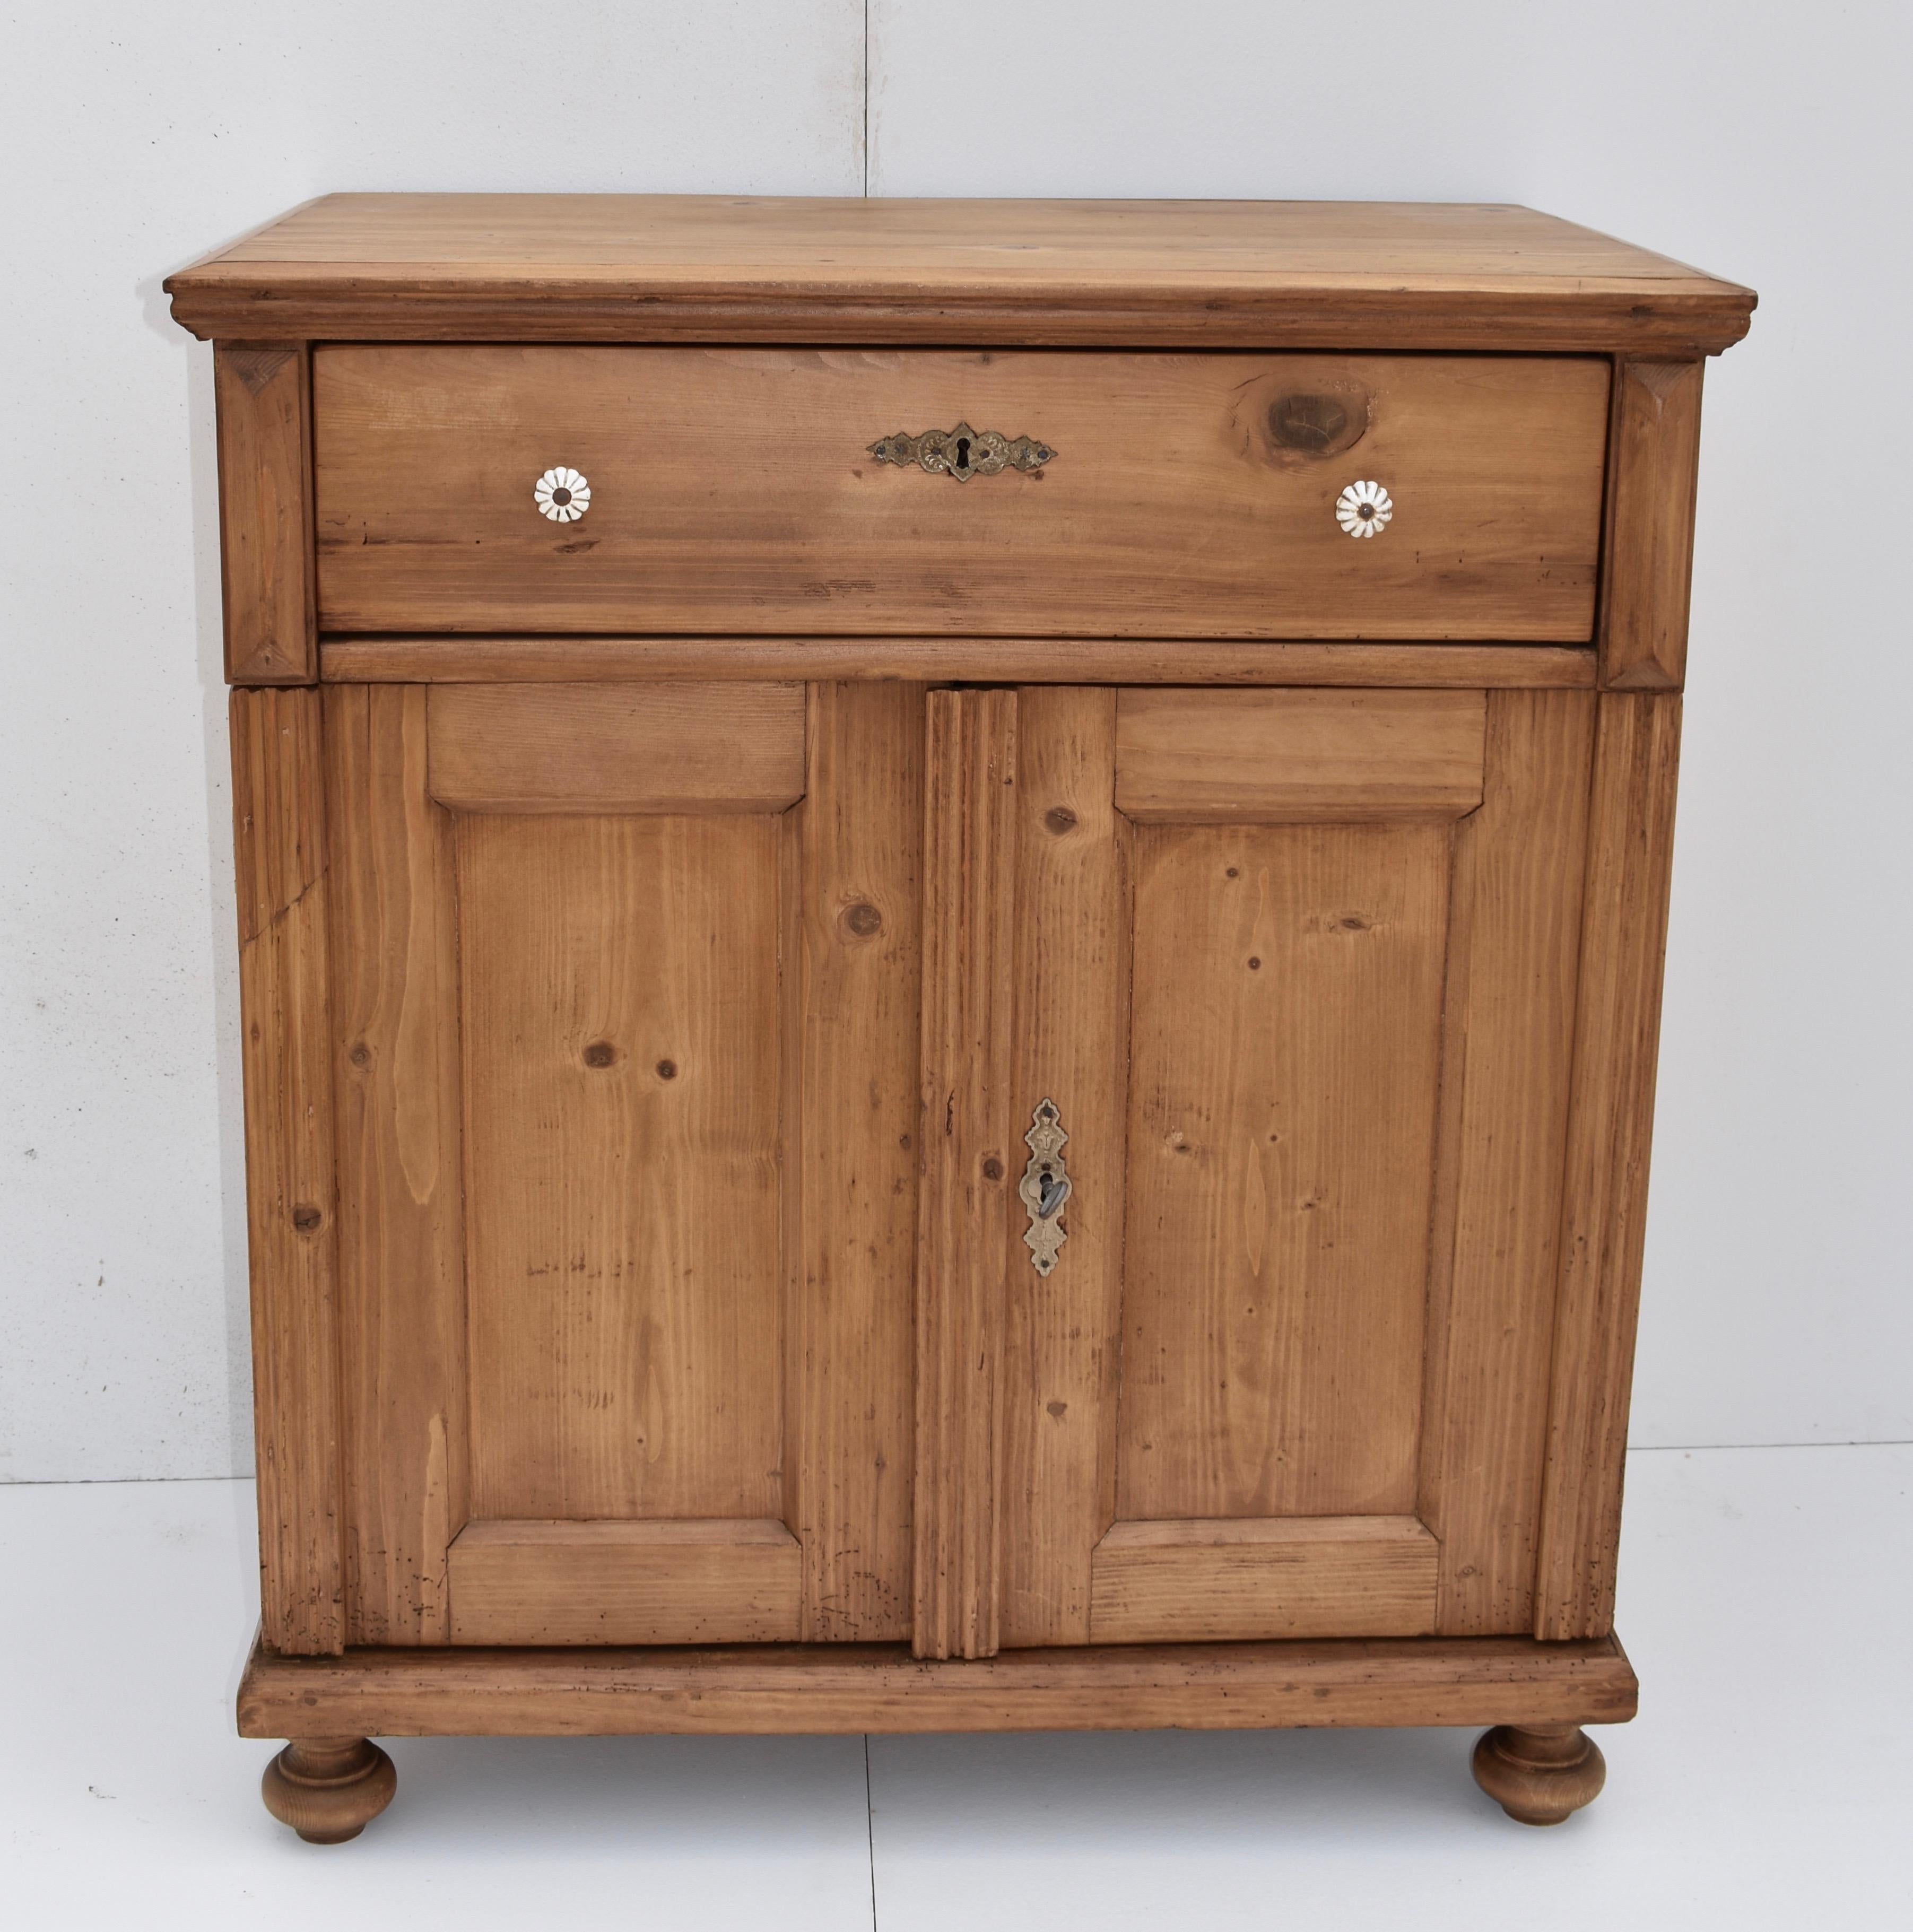 This is a very pretty pine dresser base with a step-down top edge and one long handcut dovetailed drawer above two wide-swinging flat-paneled doors. The front corners are decorated with hand carved fluting.